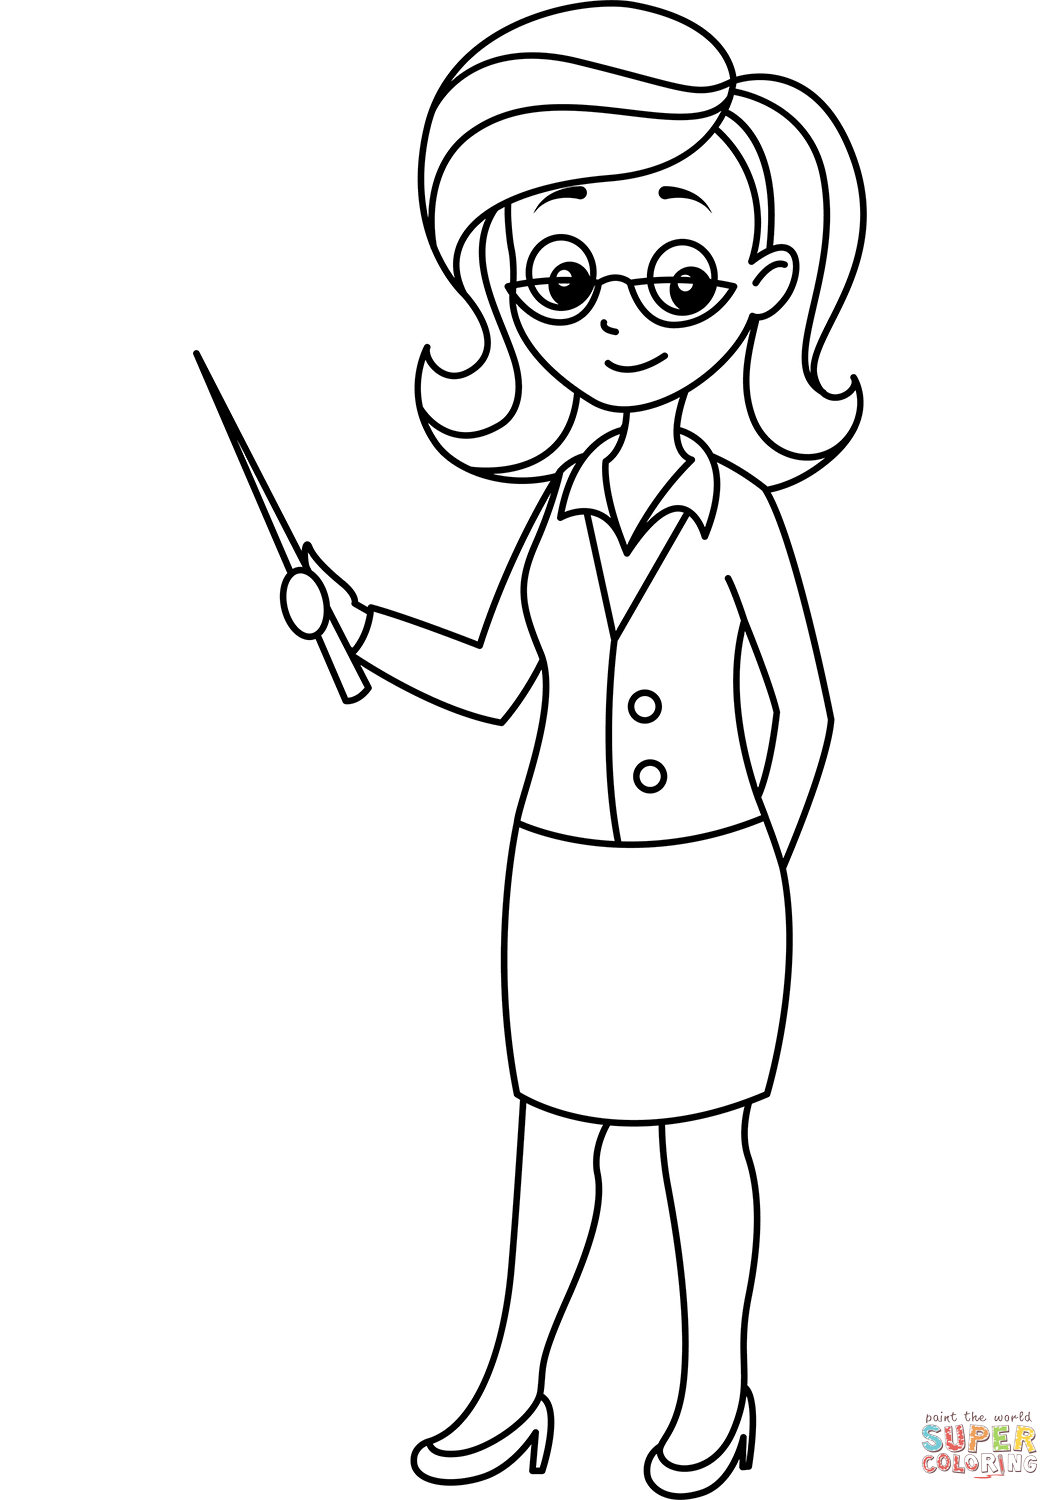 Cartoon teacher coloring page free printable coloring pages